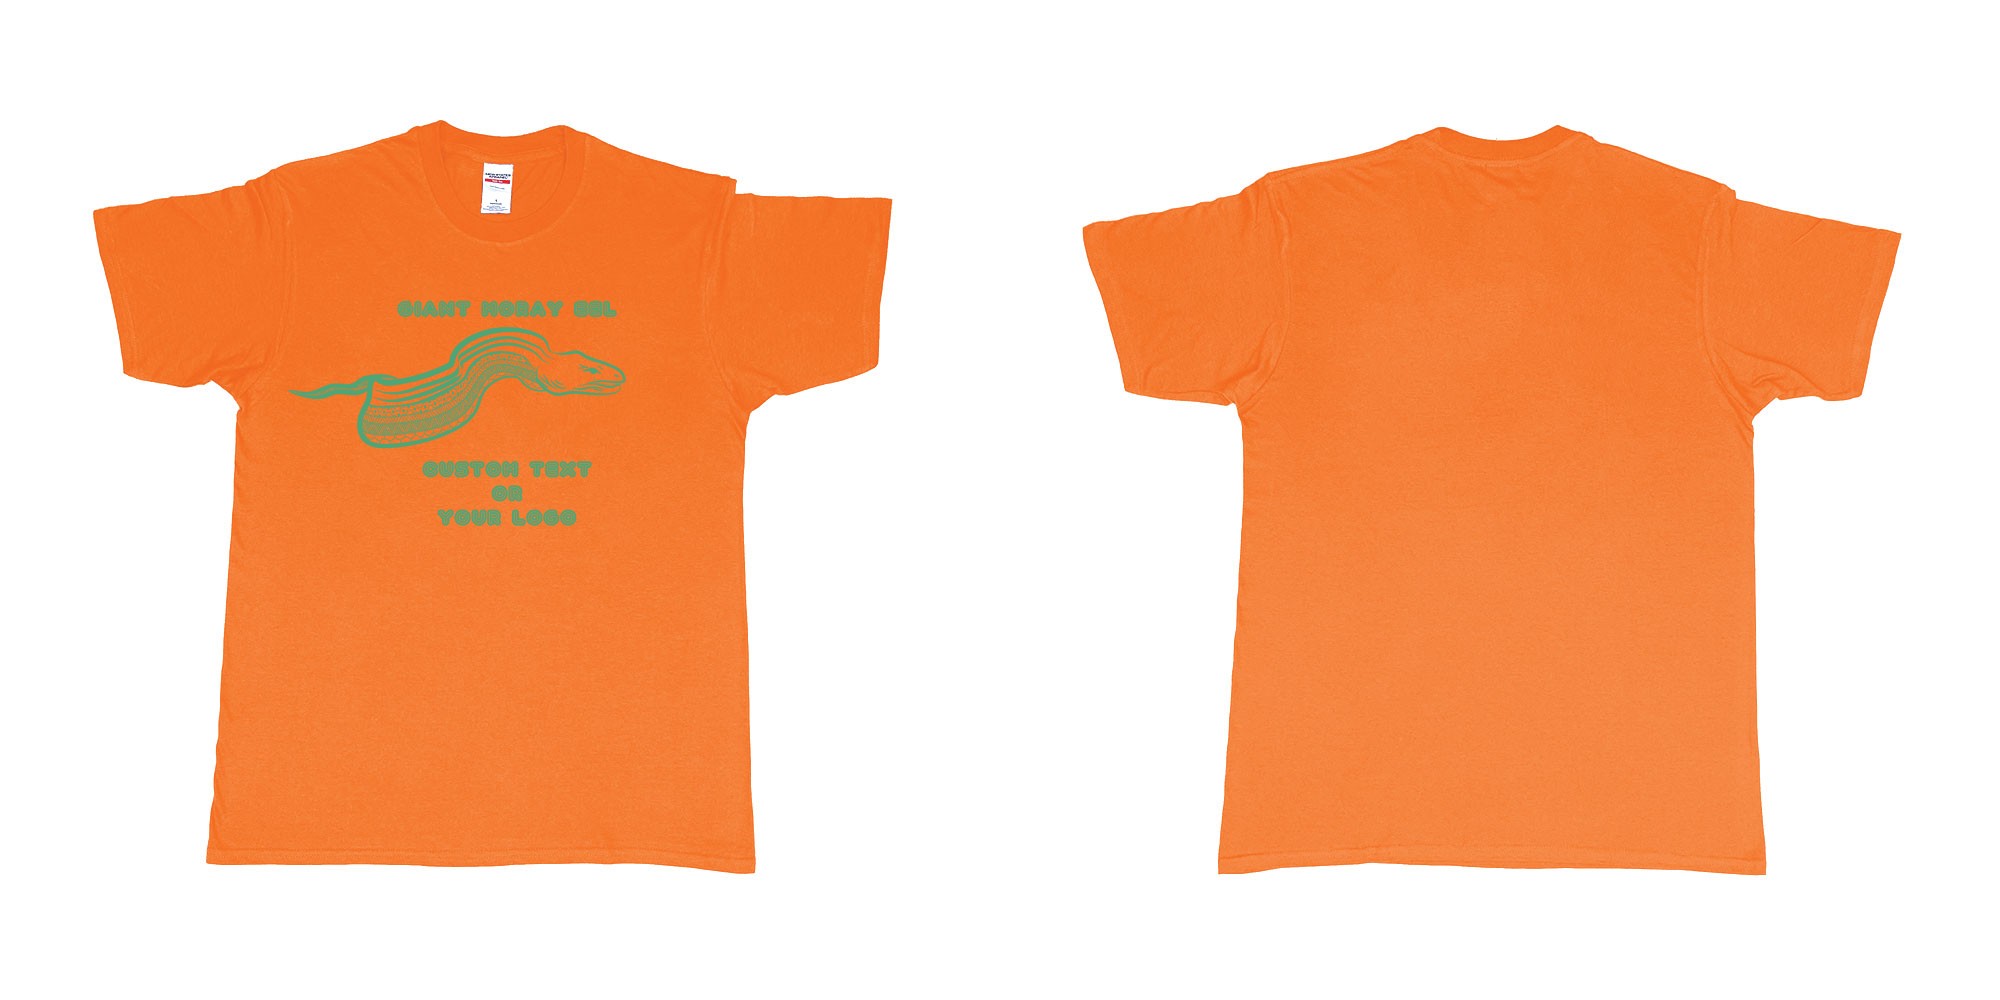 Custom tshirt design giant moray eel tribal in fabric color orange choice your own text made in Bali by The Pirate Way